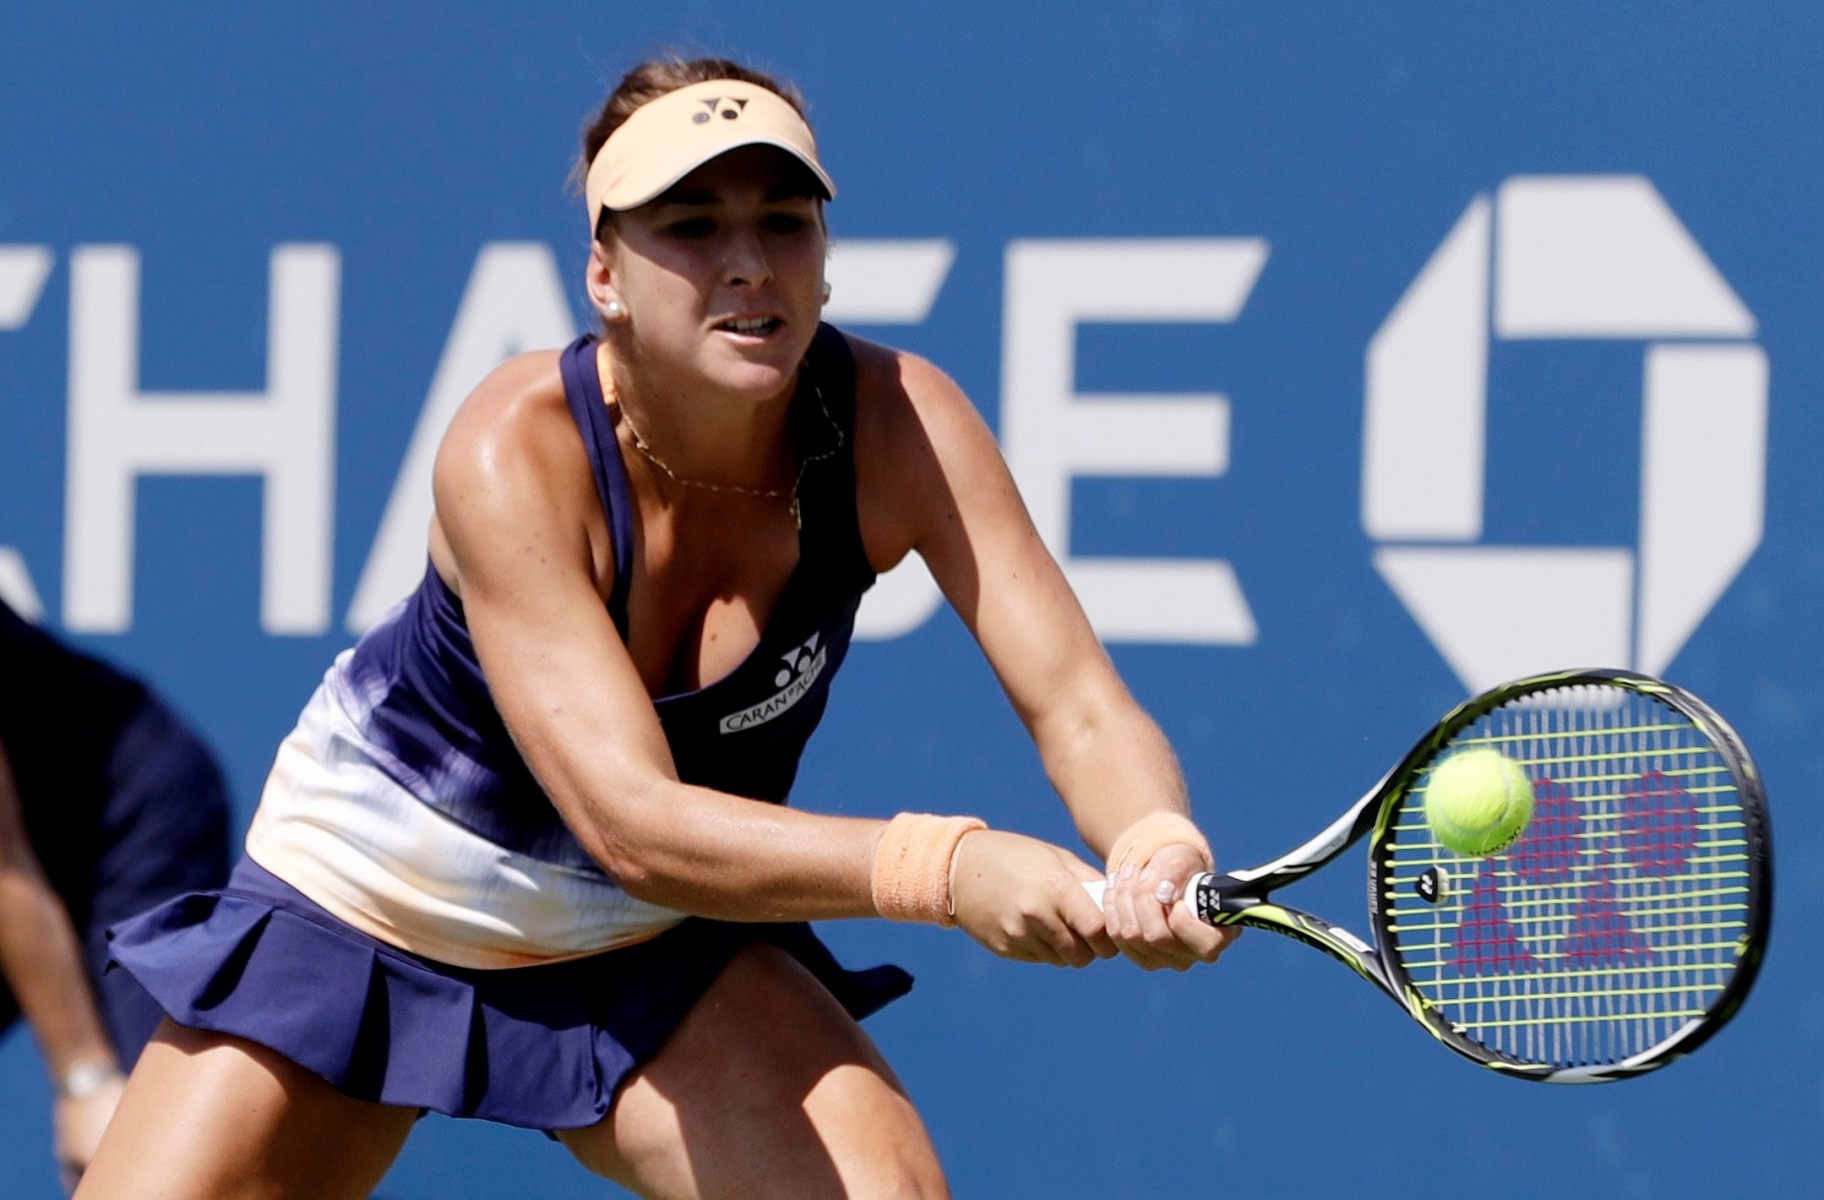 Belinda Bencic, of Switzerland, returns a shot to Samantha Crawford, of the United States, during the first round of the U.S. Open tennis tournament, Monday, Aug. 29, 2016, in New York. (AP Photo/Seth Wenig) US Open Tennis